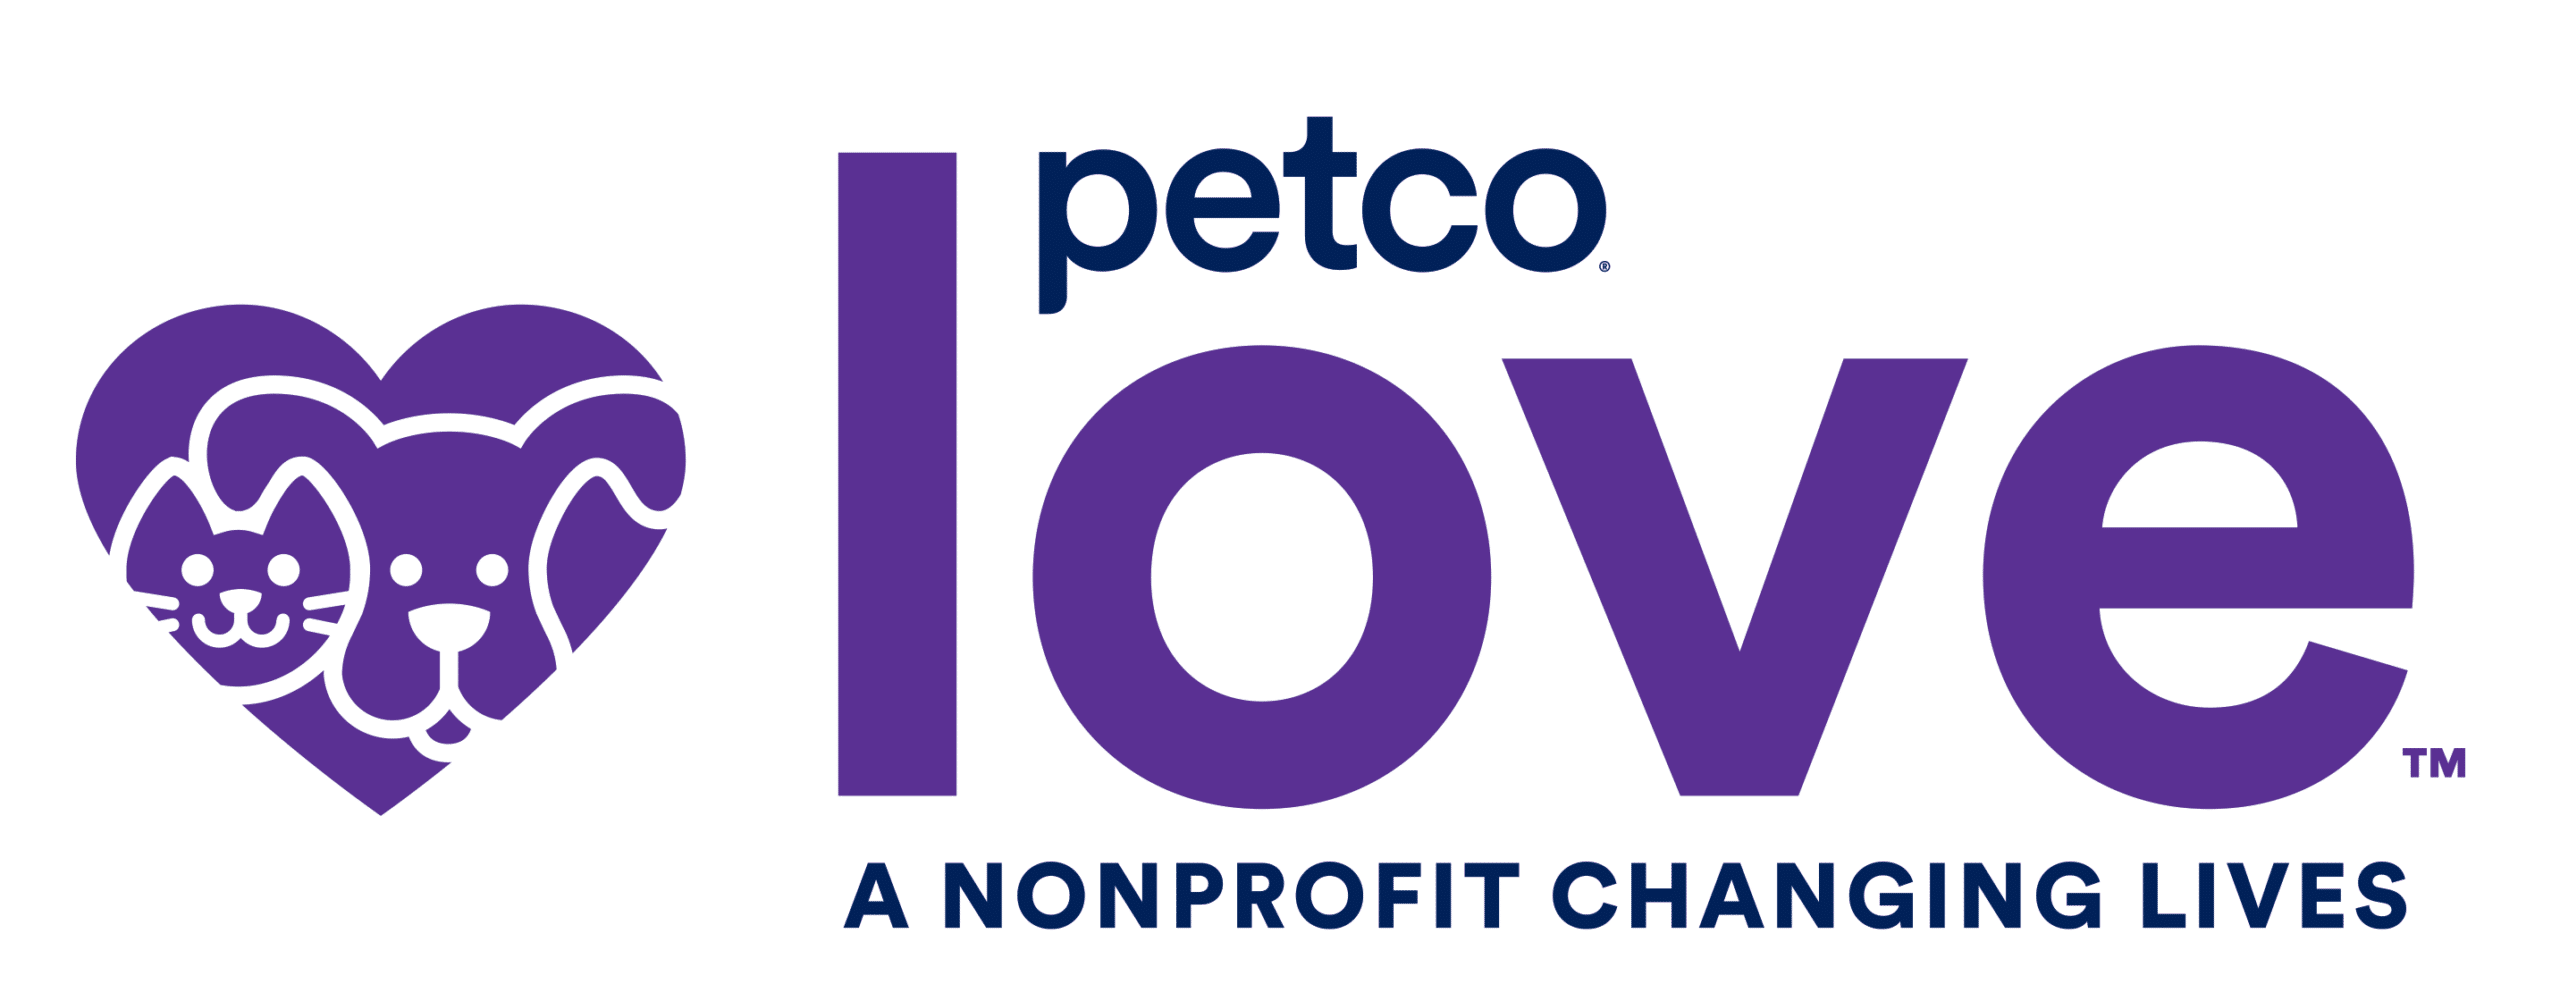 Purple logo with heart for Petco Love.